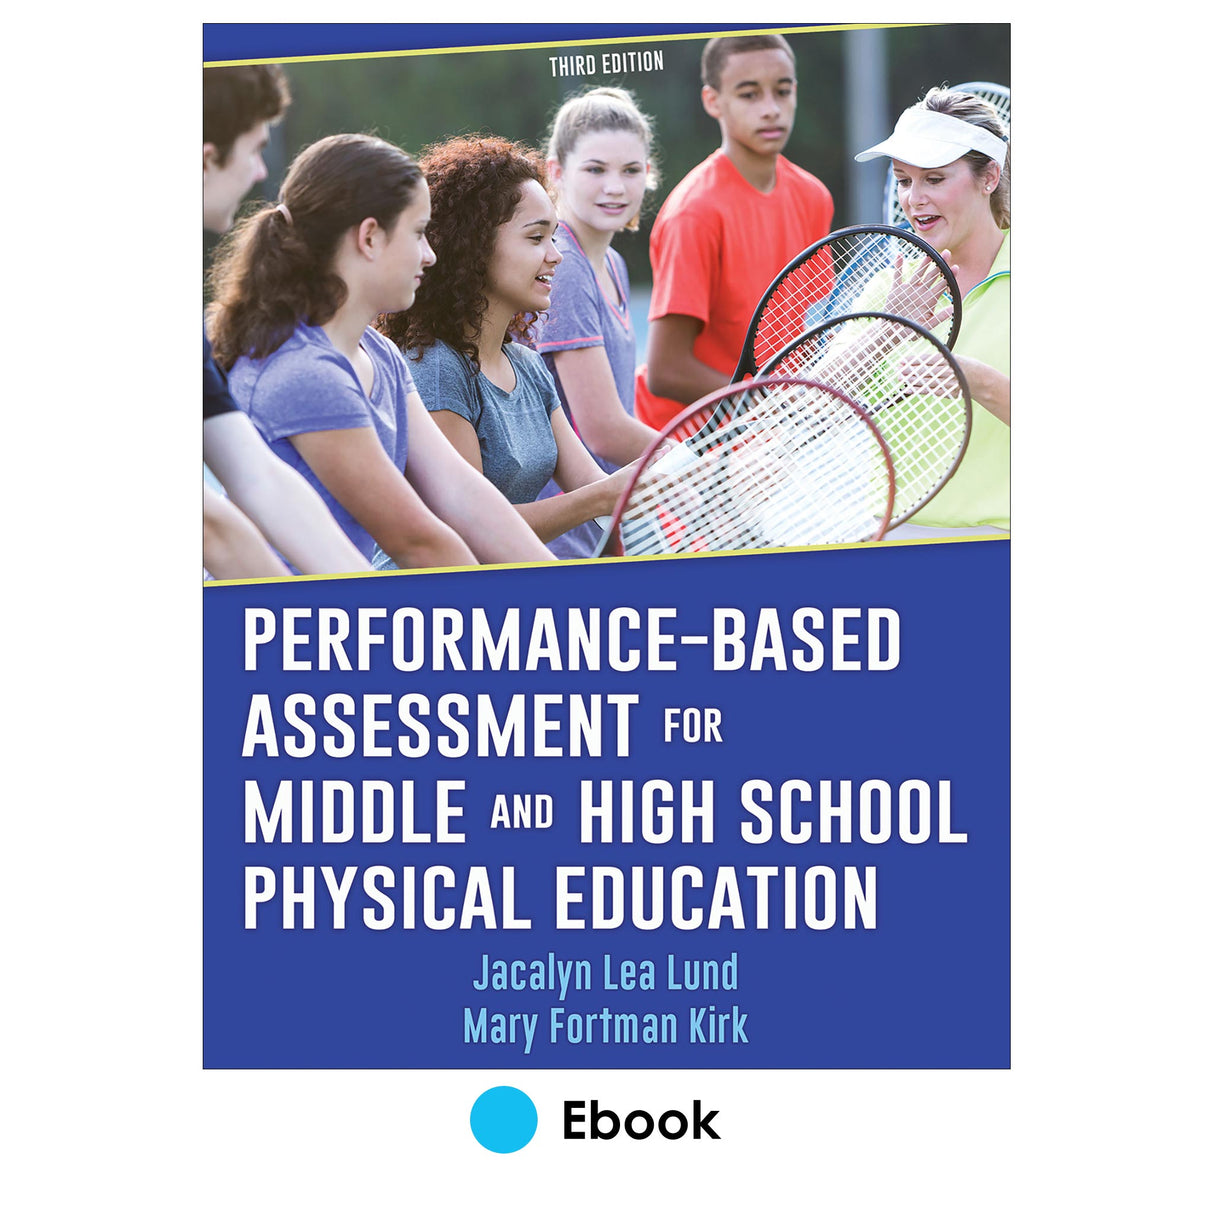 Performance-Based Assessment for Middle and High School Physical Education 3rd Edition epub